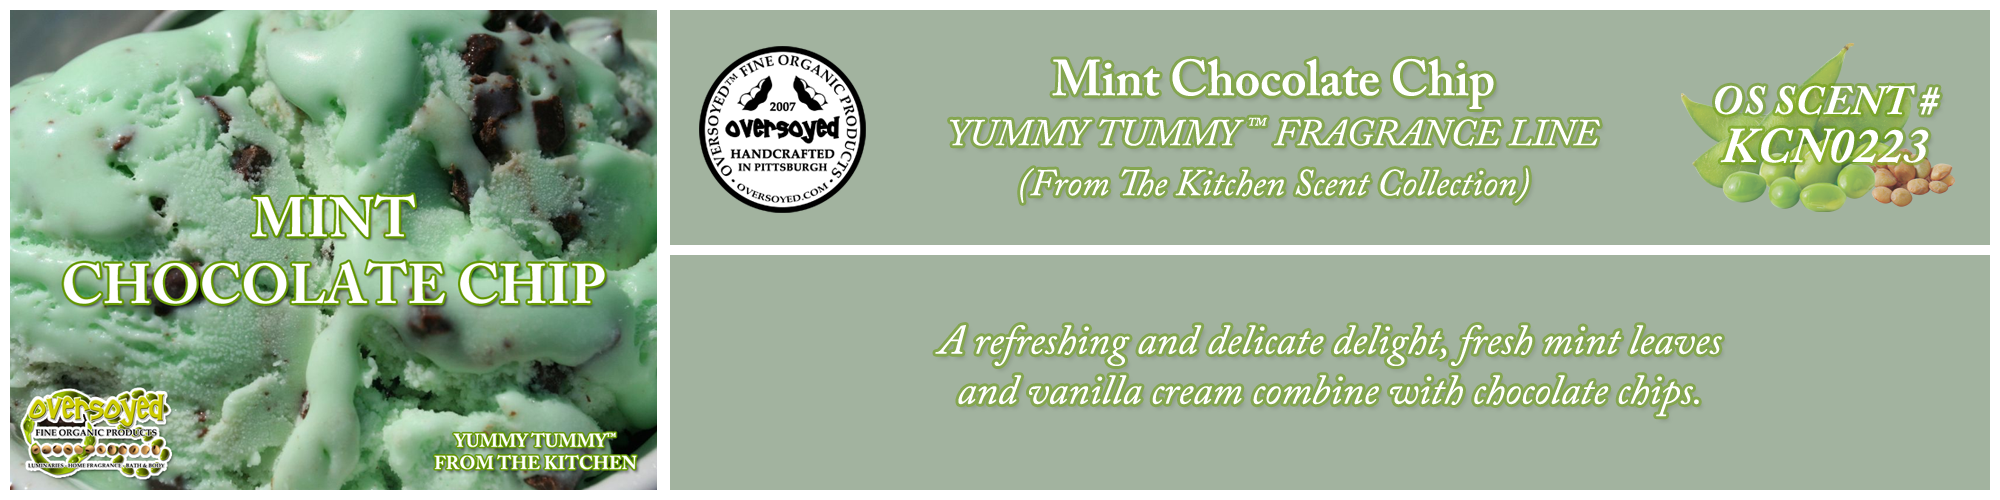 Mint Chocolate Chip Handcrafted Products Collection